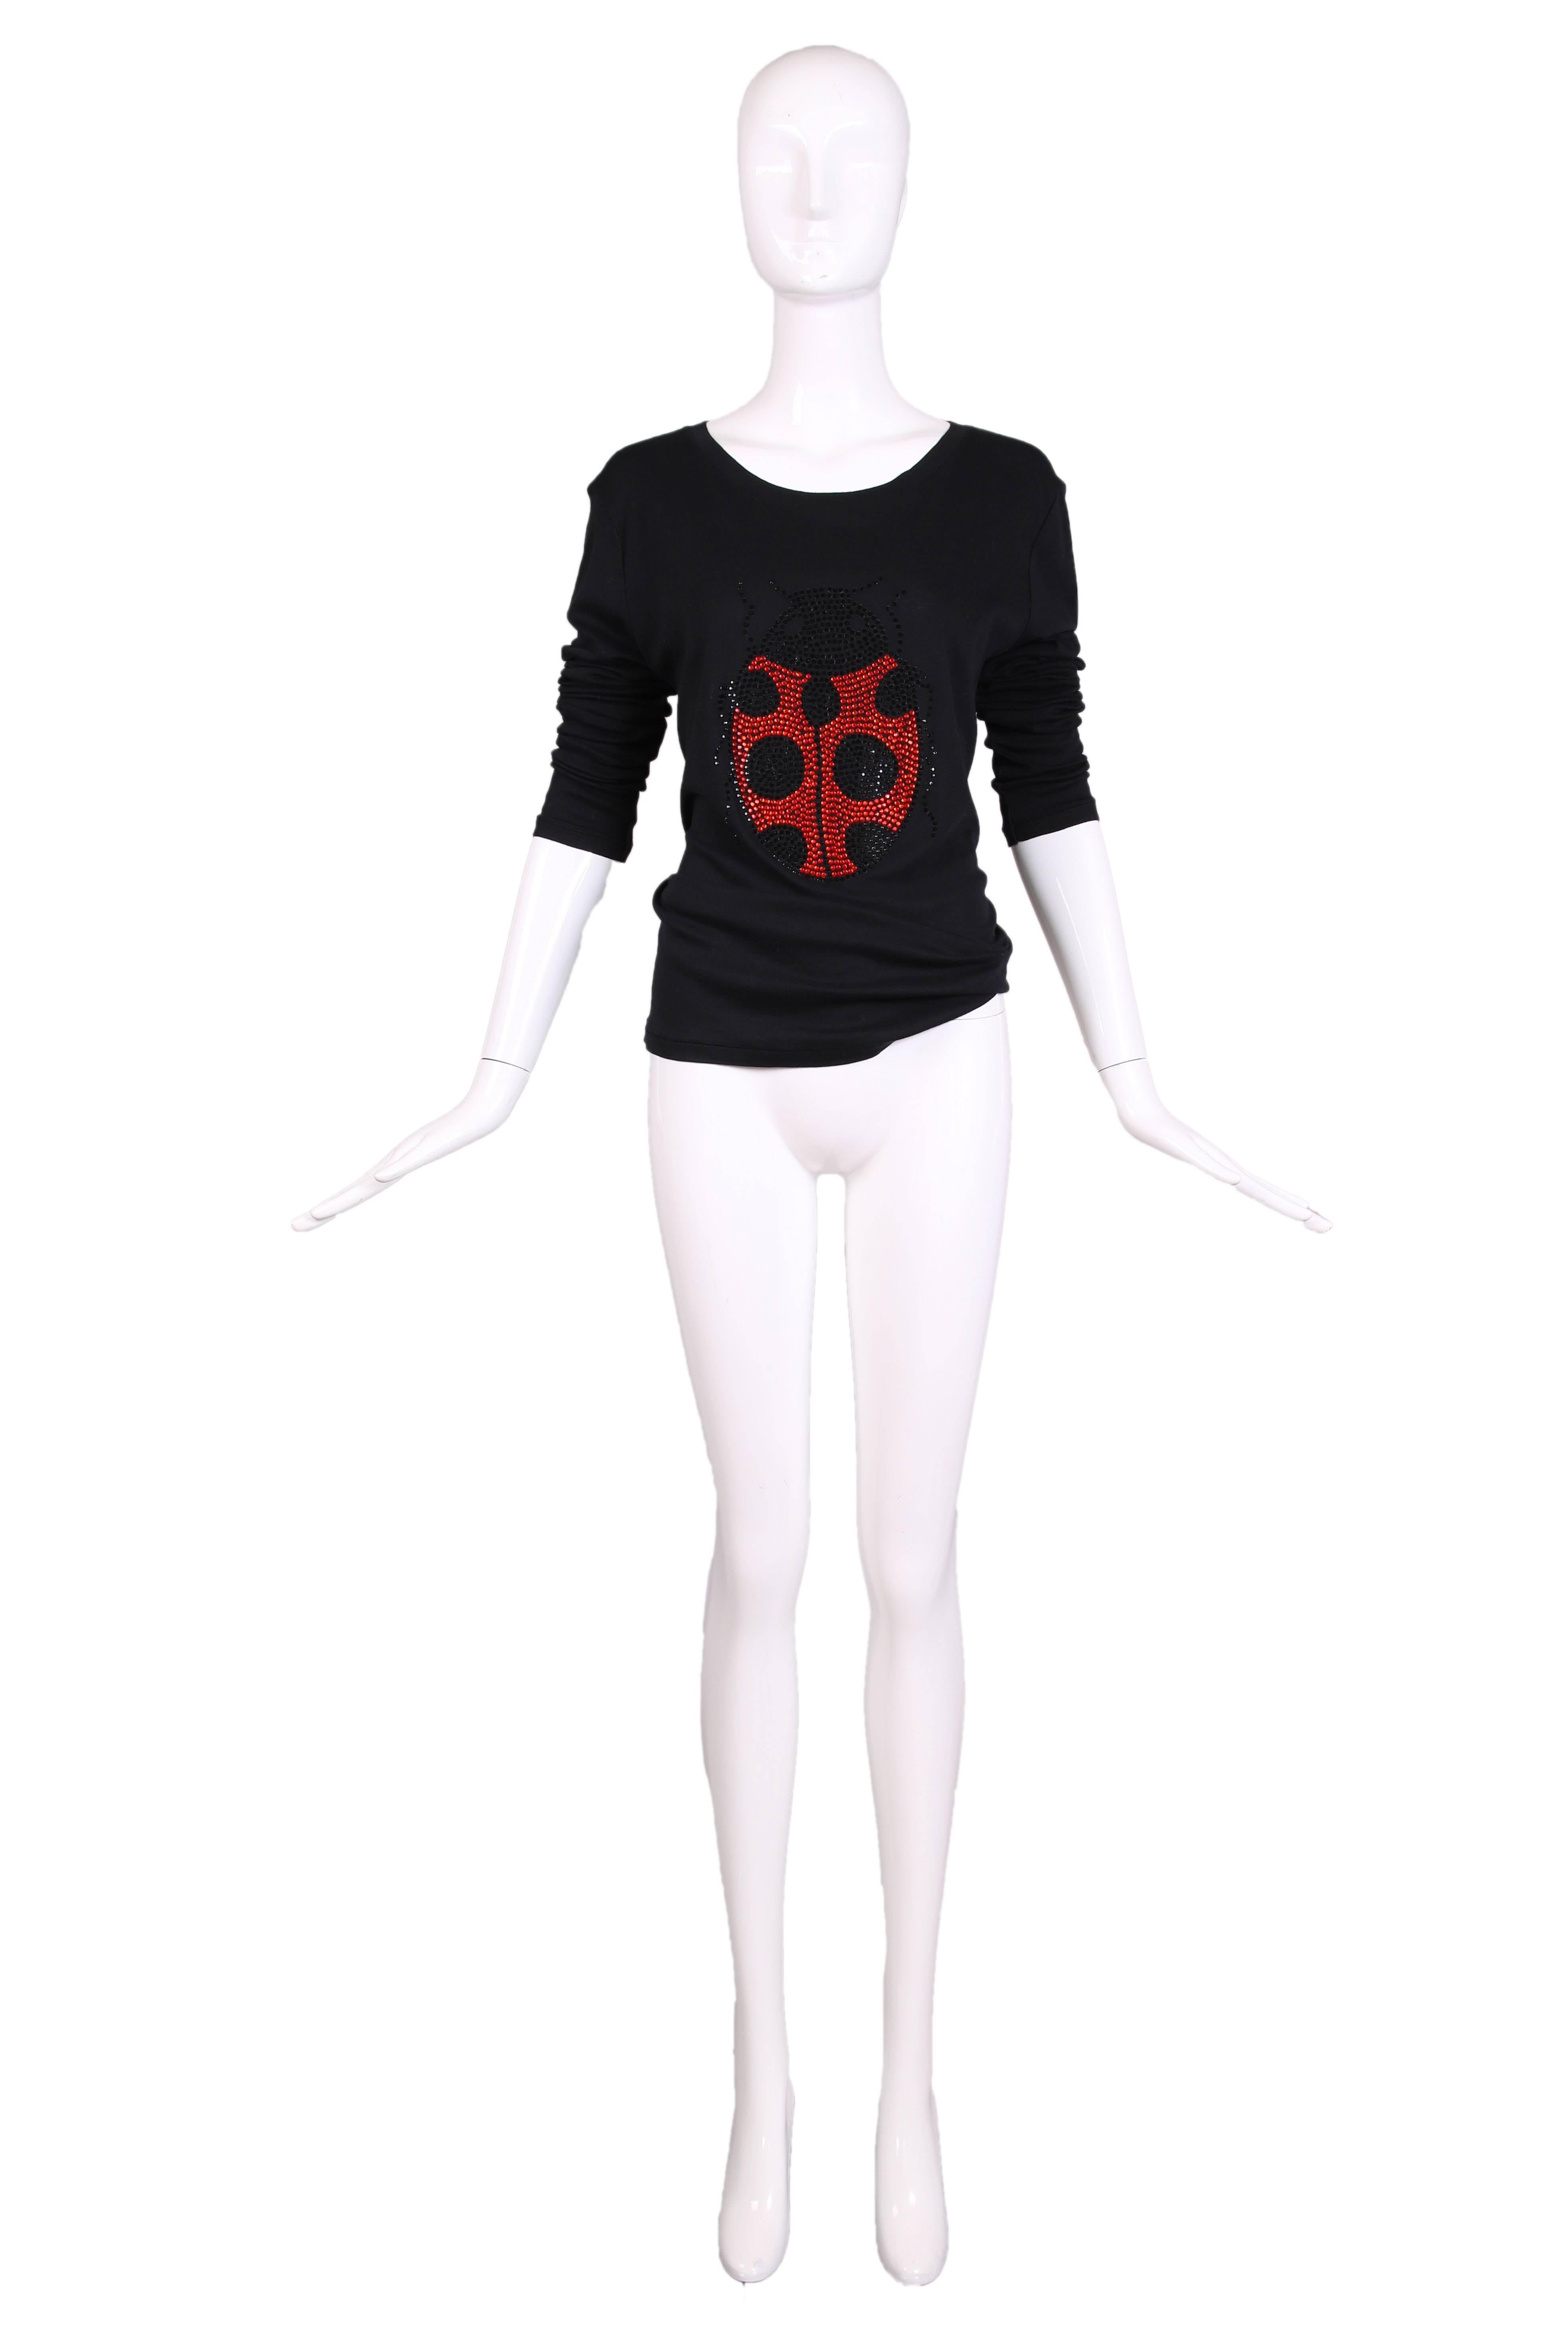 Sonia by Sonia Rykiel black cotton long sleeved t-shirt made of 100% cotton with a jeweled ladybug design at center front. Size XL. In excellent condition.